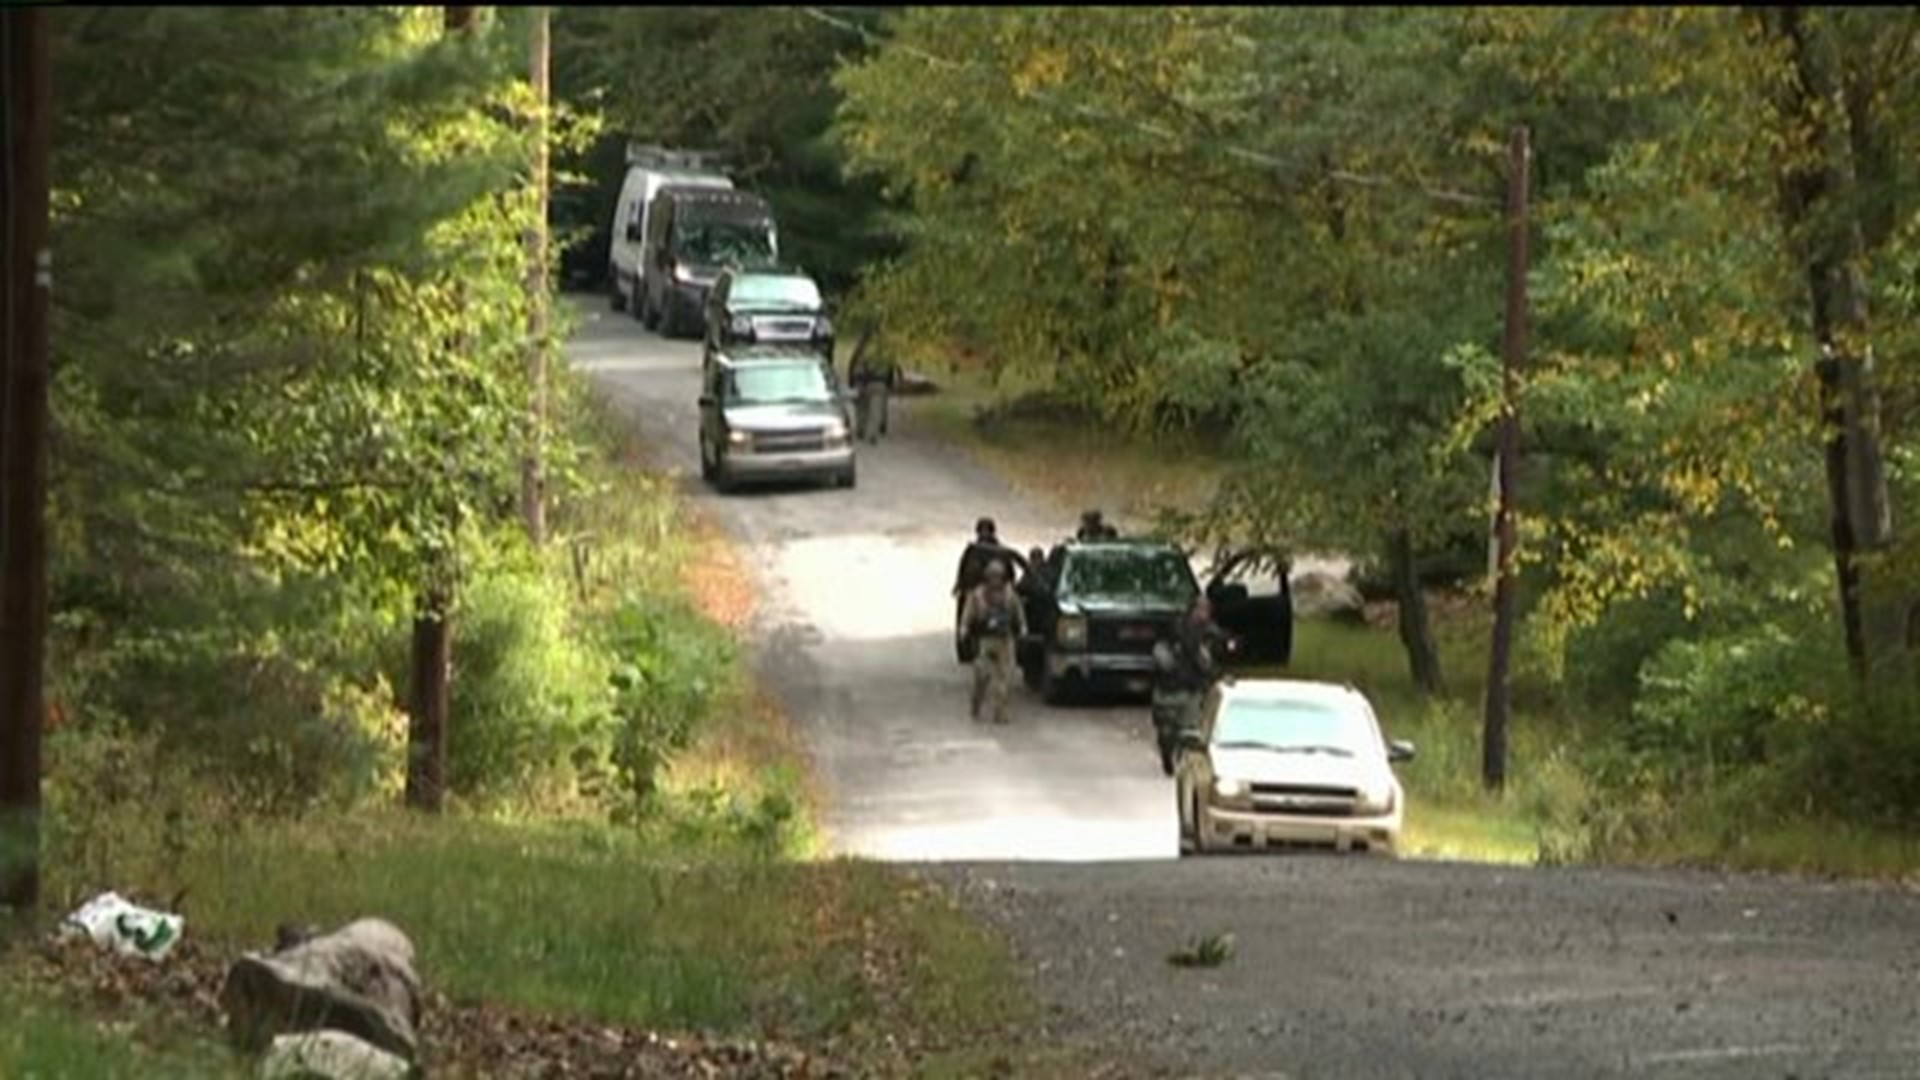 Search for Frein: Day 12